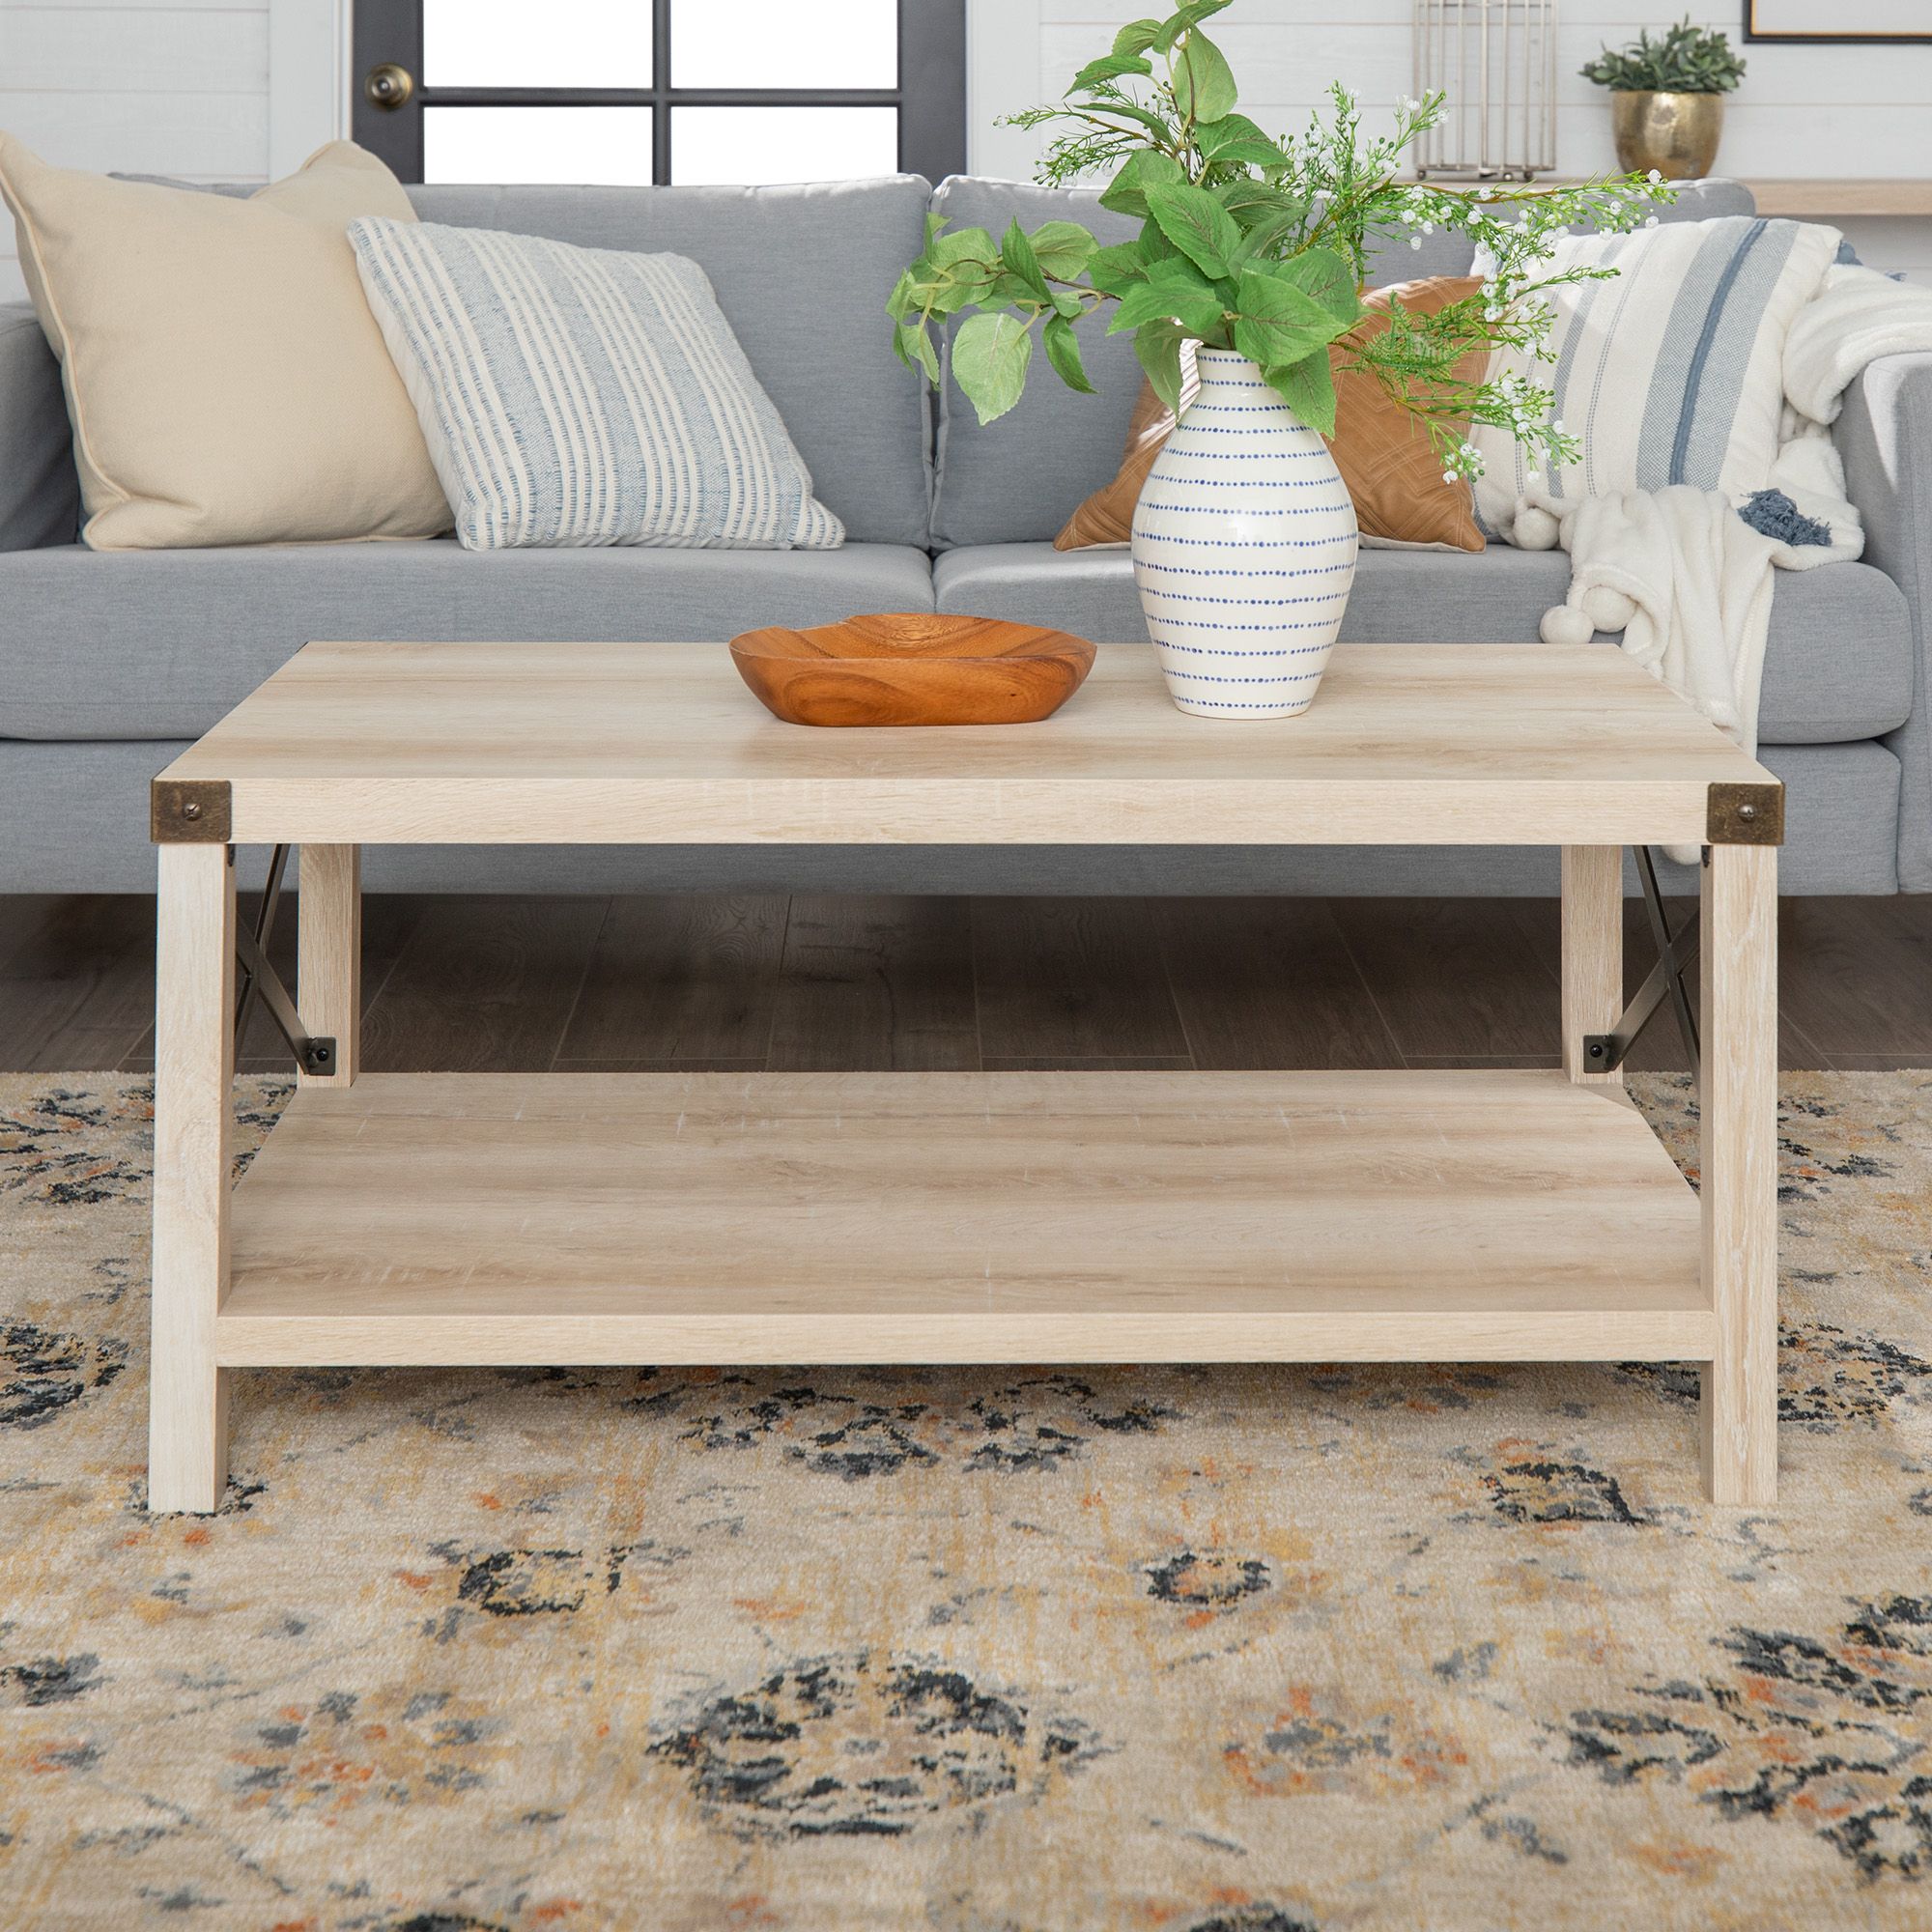 Most Current Metal And Mission Oak Coffee Tables Pertaining To Manor Park 3 Piece Rustic Wood & Metal Coffee Table Set (View 1 of 20)